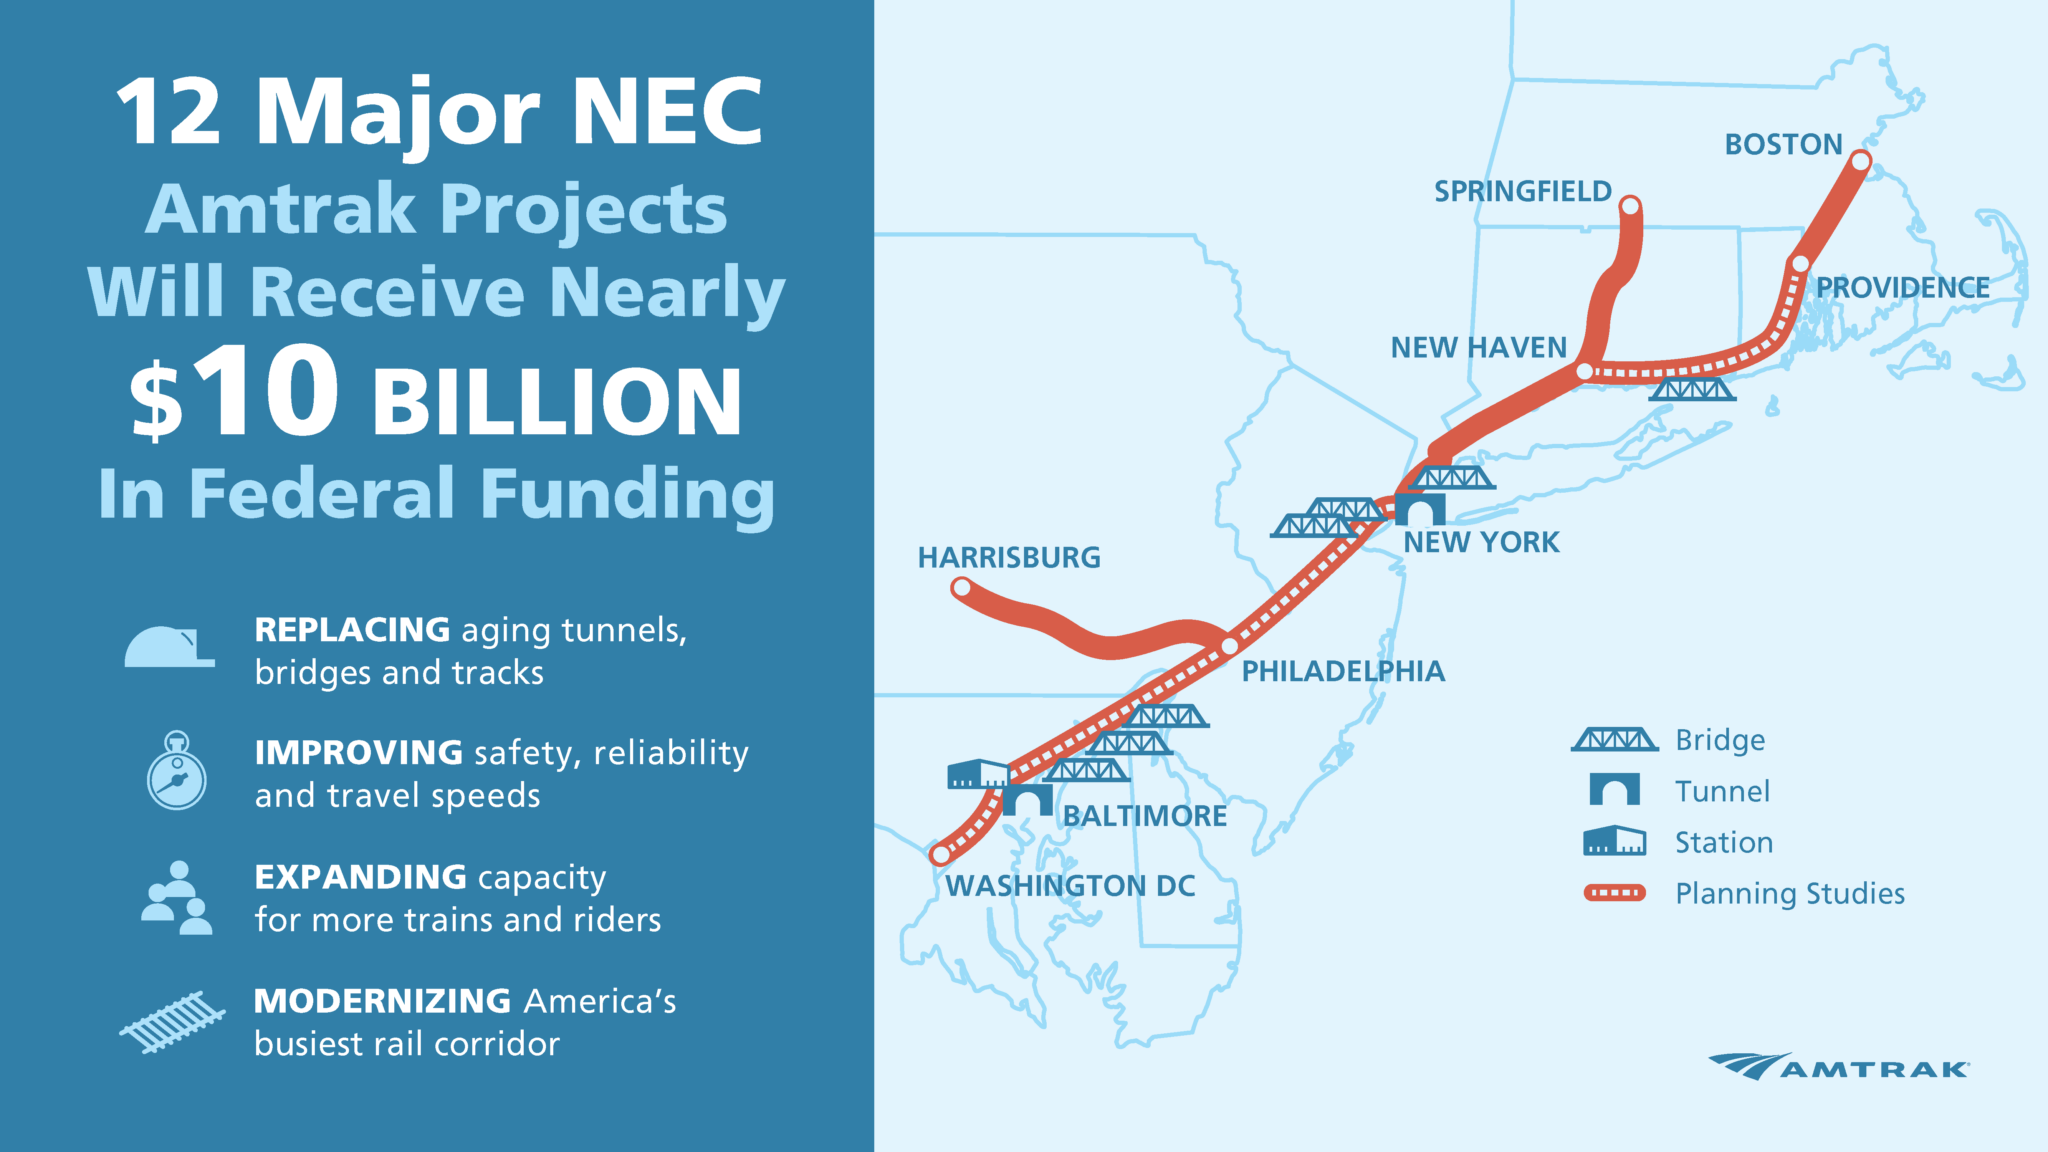 This work will modernise the Northeast Corridor, improving reliability and service quality